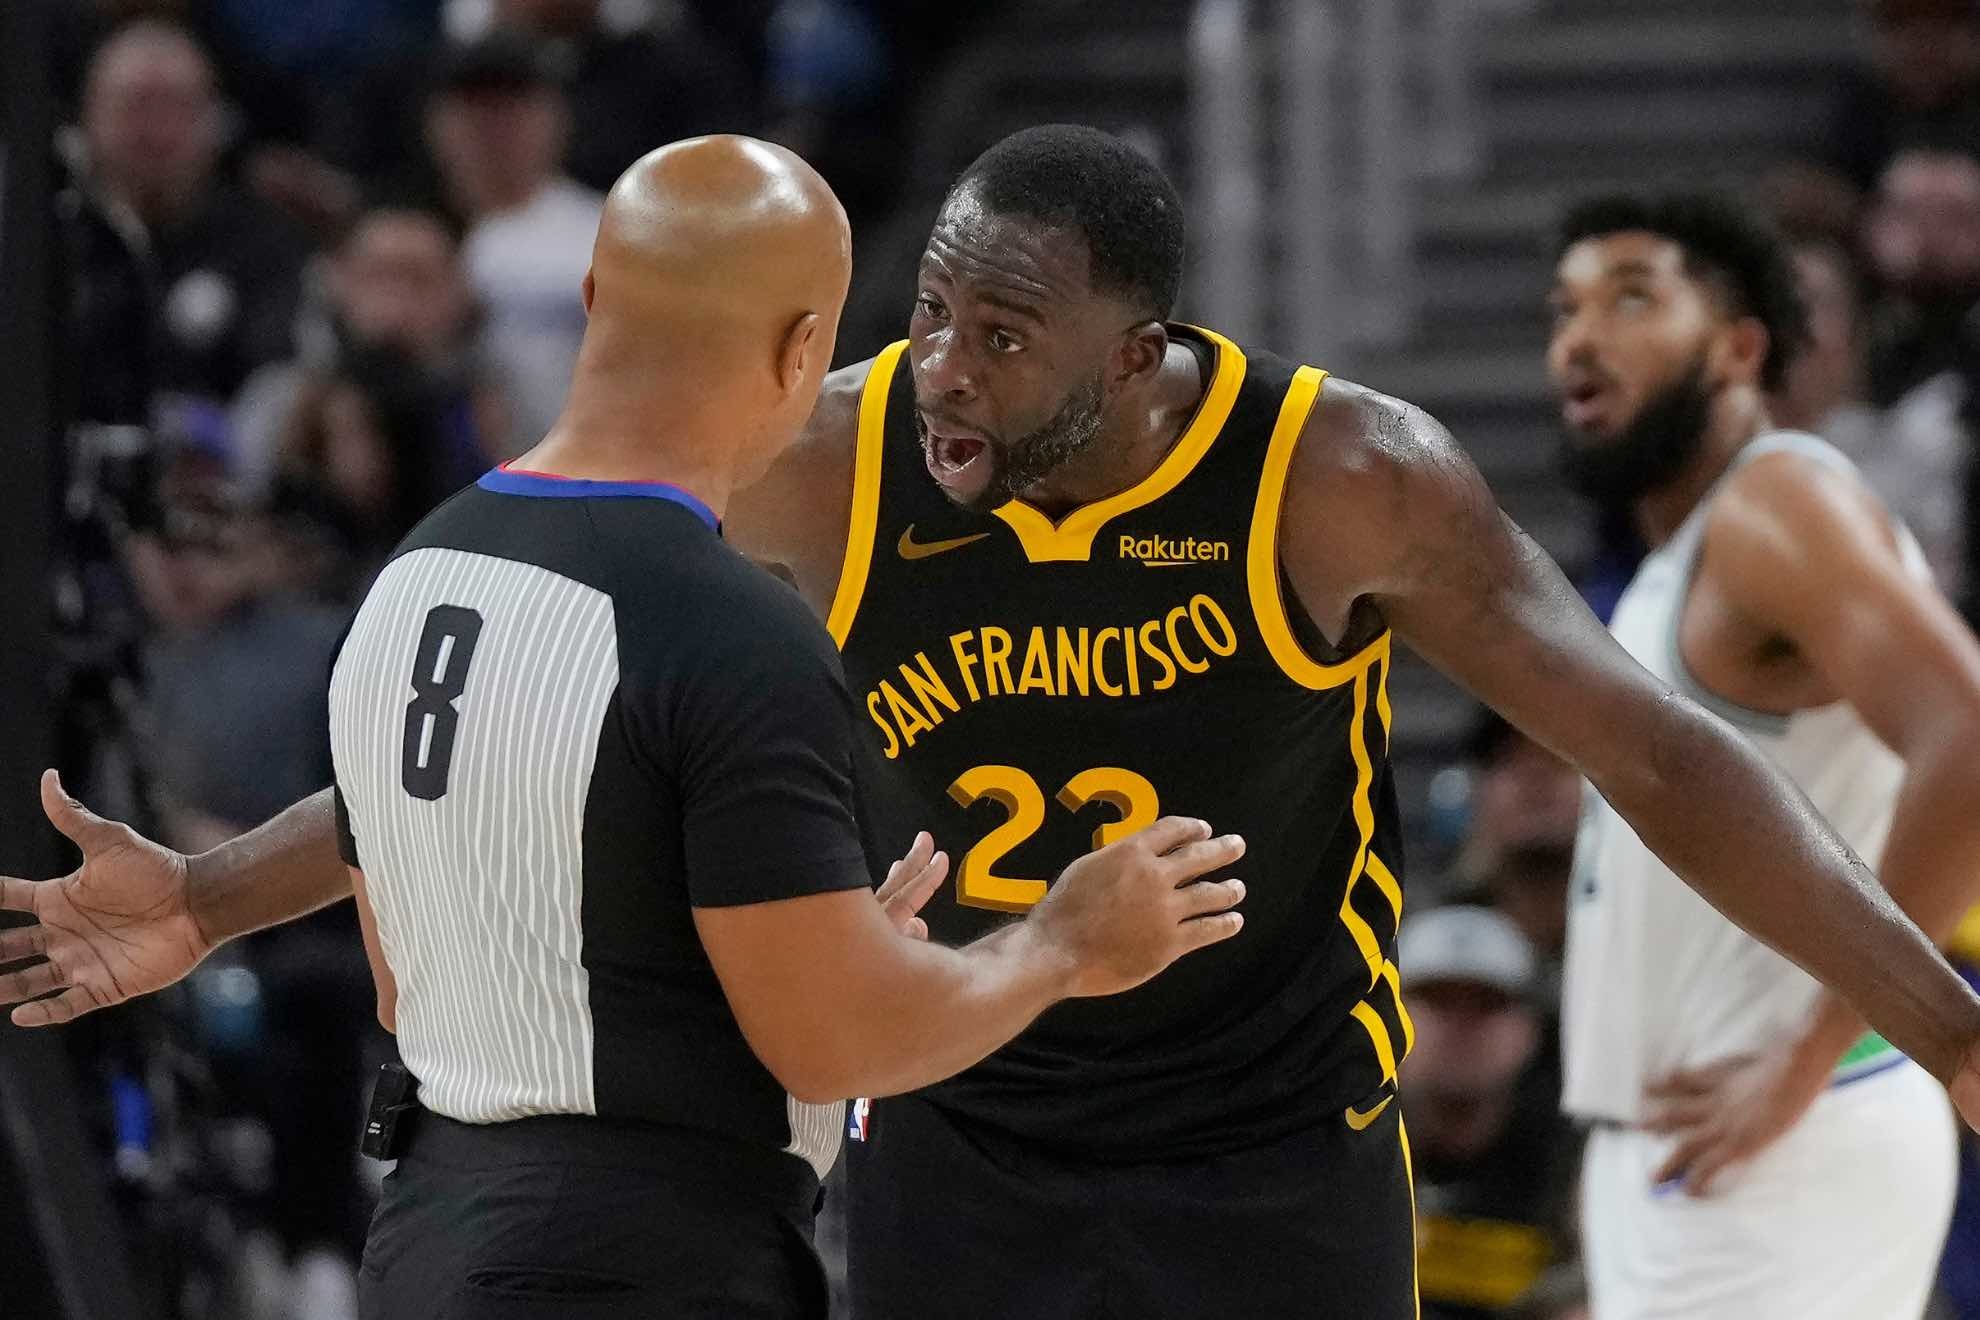 Draymond Green has a long history of ejections